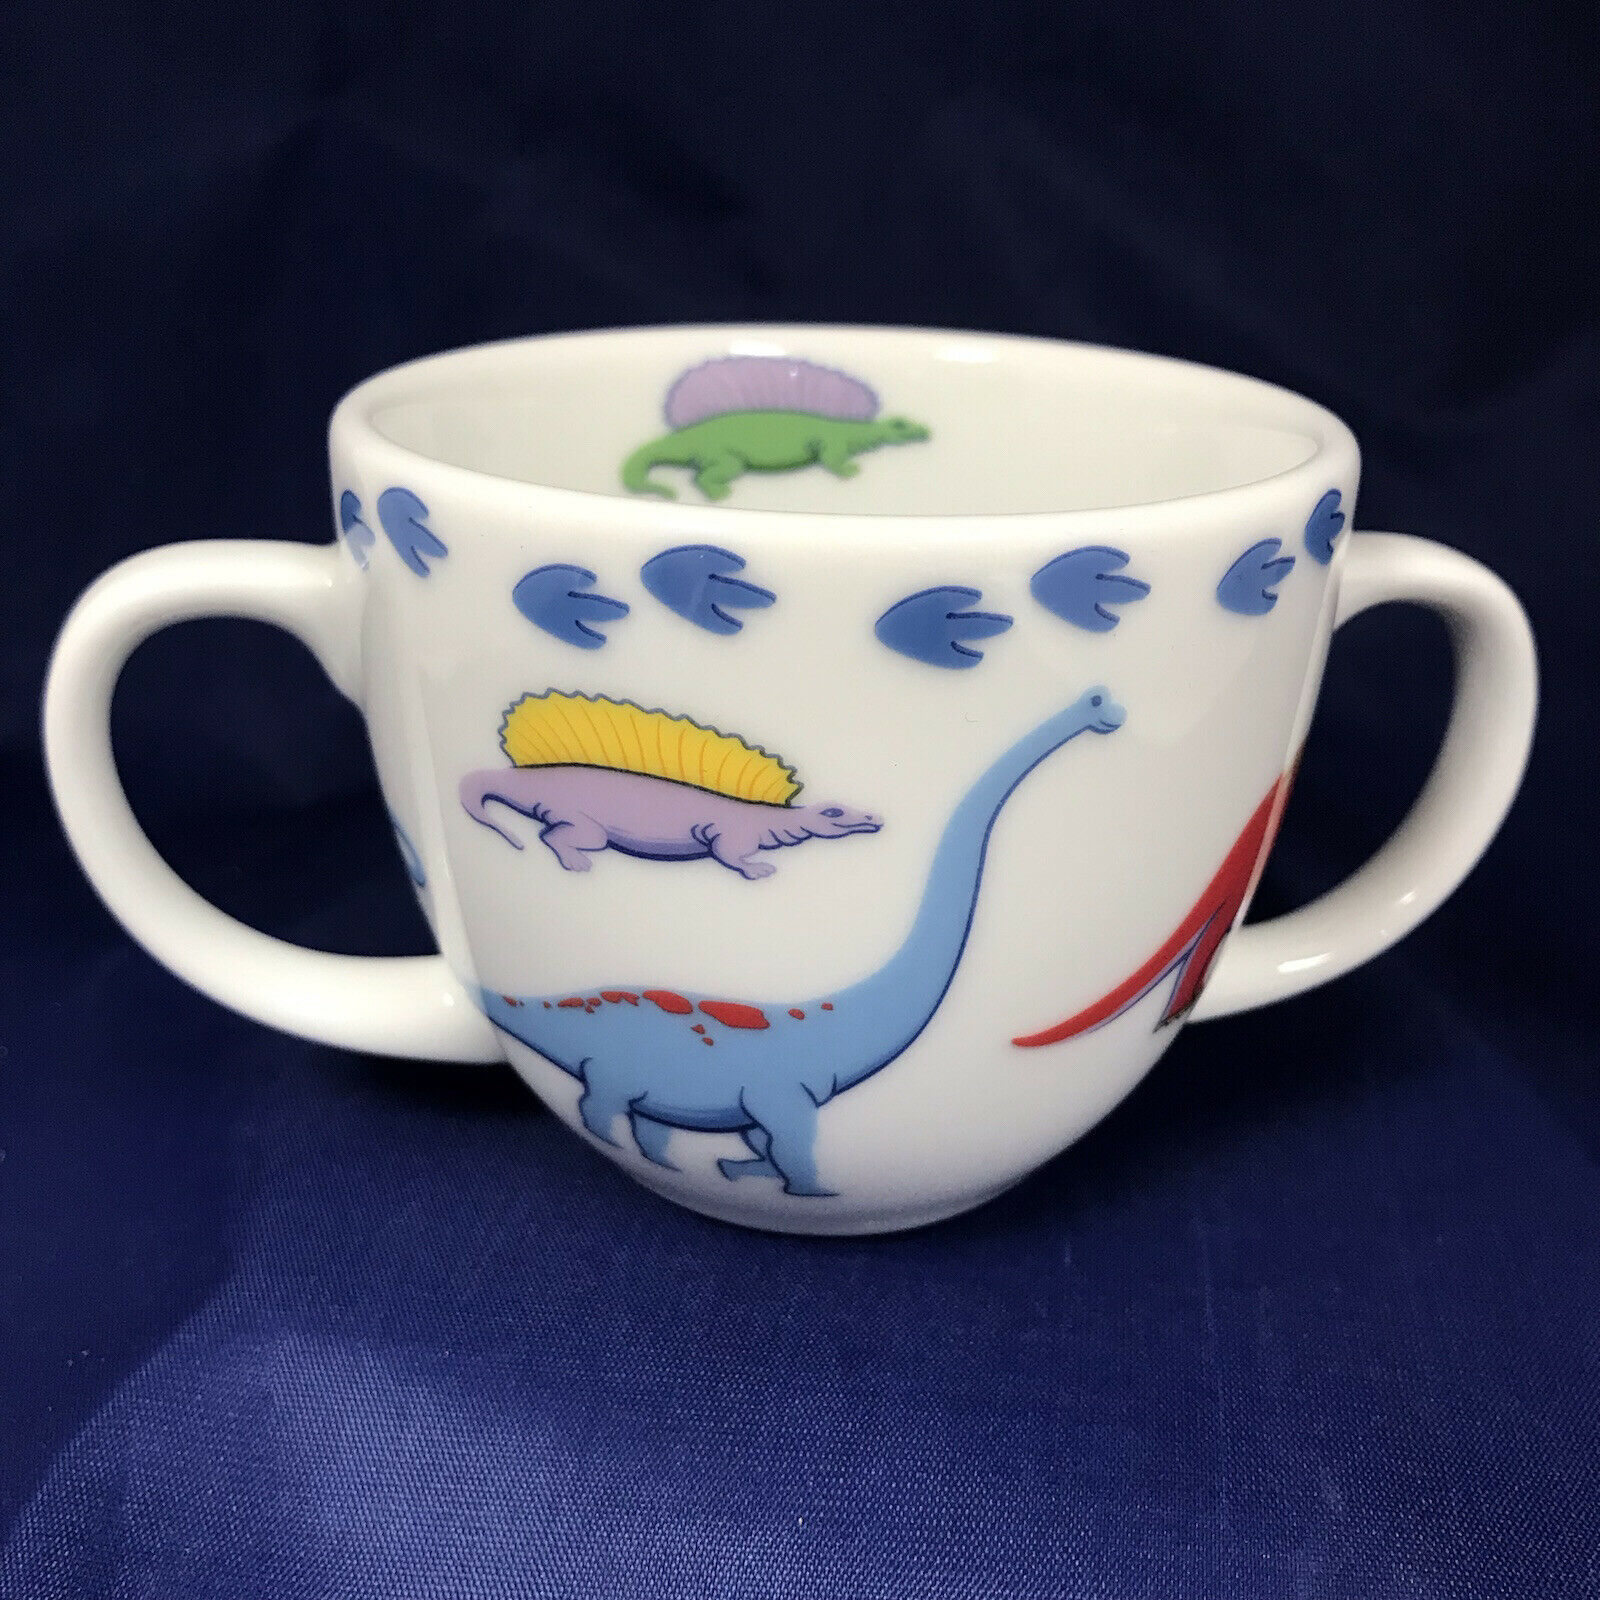 Tiffany & Co. 2007 Dinosaurs Child’s 2 Handled Porcelain Mug Cup Made In Japan